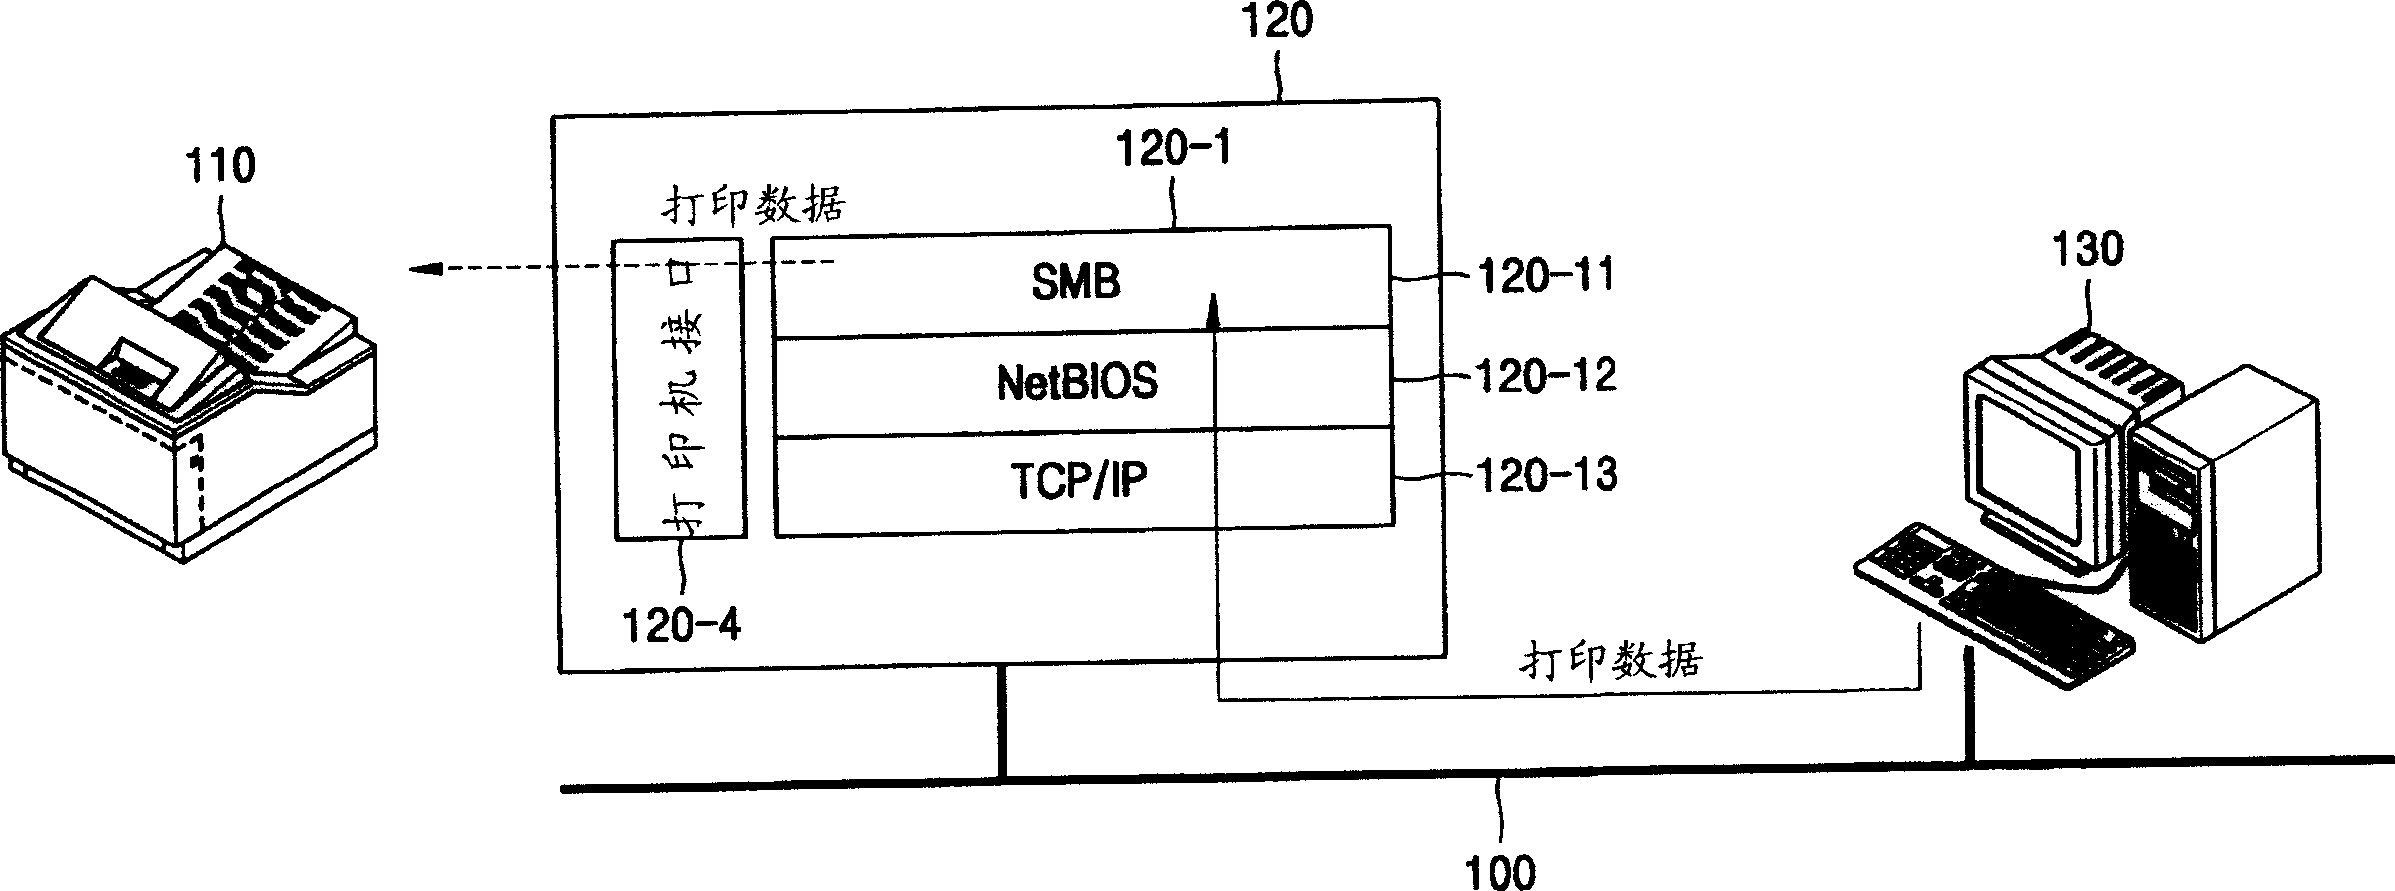 Apparatus and method for printing data using a server message block protocol